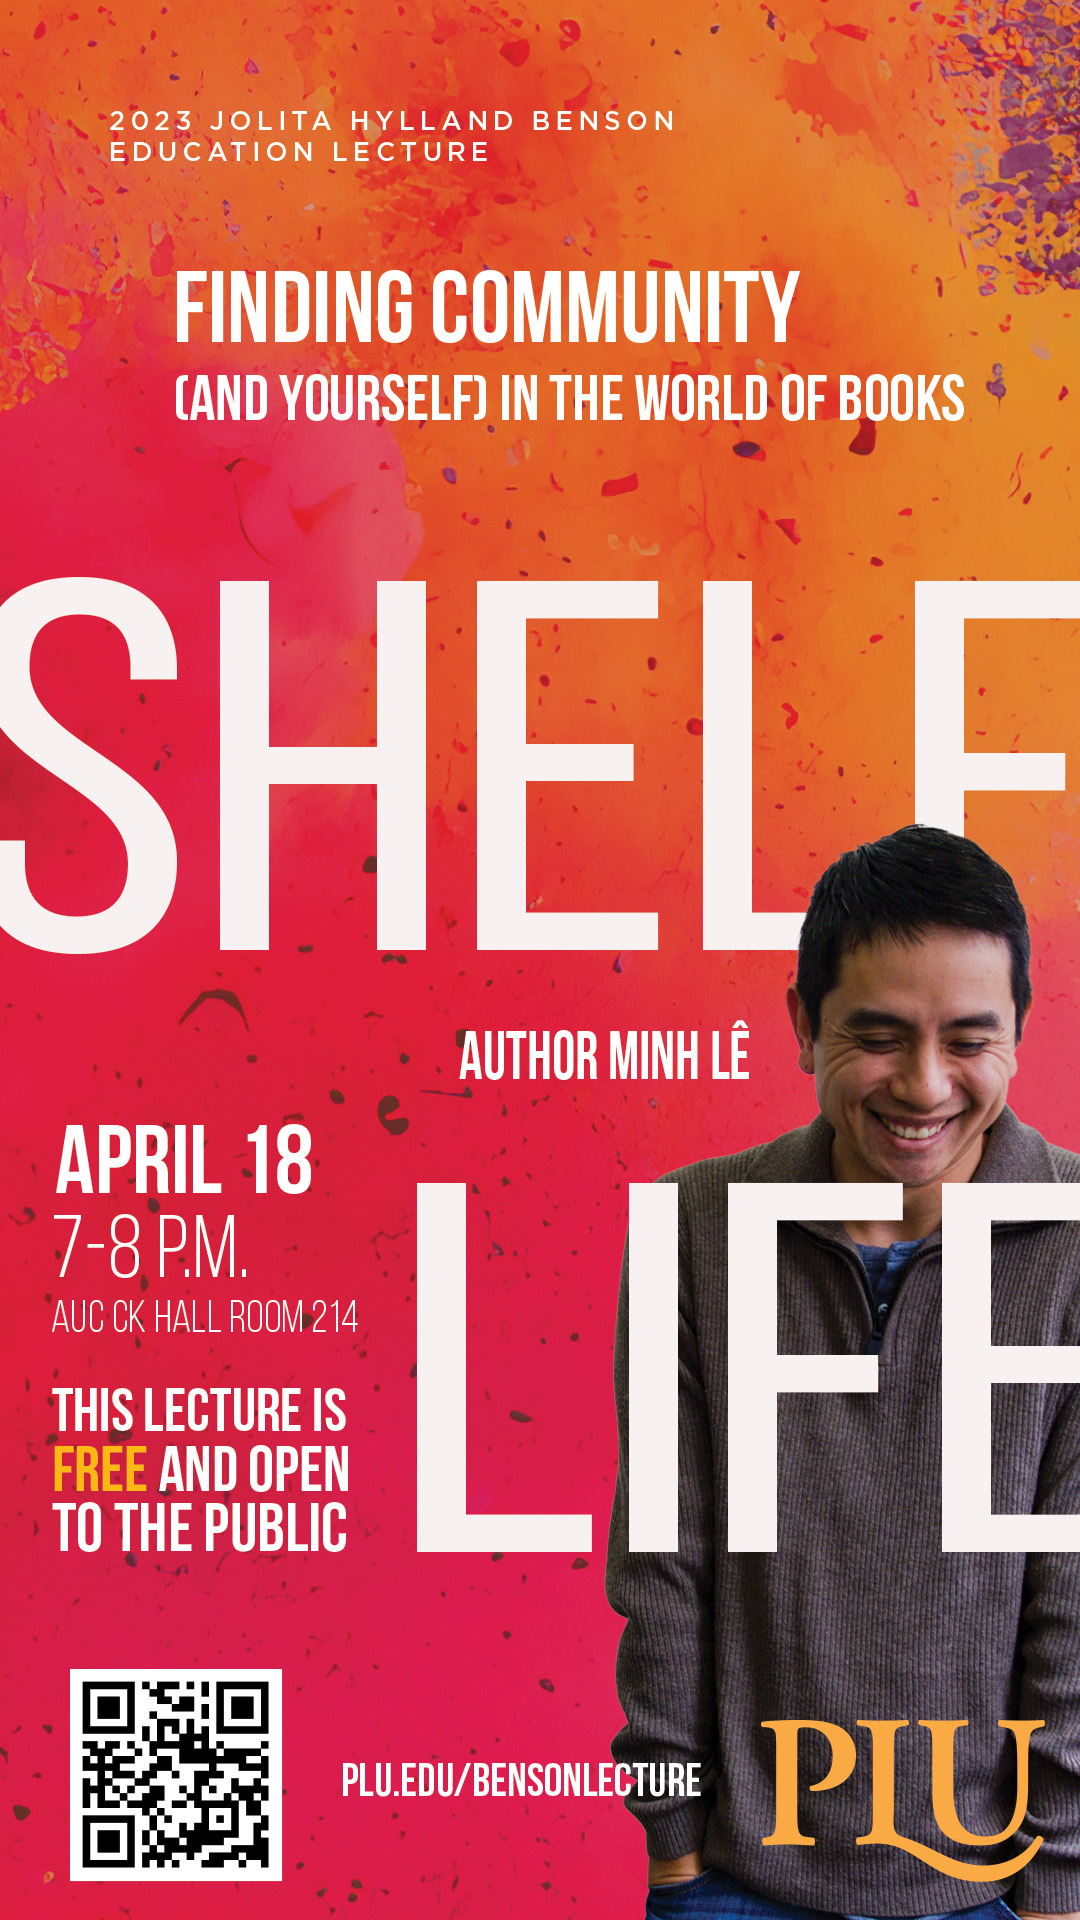 Event Flyer with image of Minh Le and text that says: Subtitle: 2023 JOLITA HYLLAND BENSON EDUCATION LECTURE Title: FINDING COMMUNITY (AND YOURSELF IN THE WORLD OF BOOKS SHELF AUTHOR: MINH LÉ • APRIL 18 7-8 P.M. AUC CK HALL ROOM 214 THIS LECTURE IS FREE AND OPEN TO THE PUBLIC • PLU.EDU/BENSONLECTURE